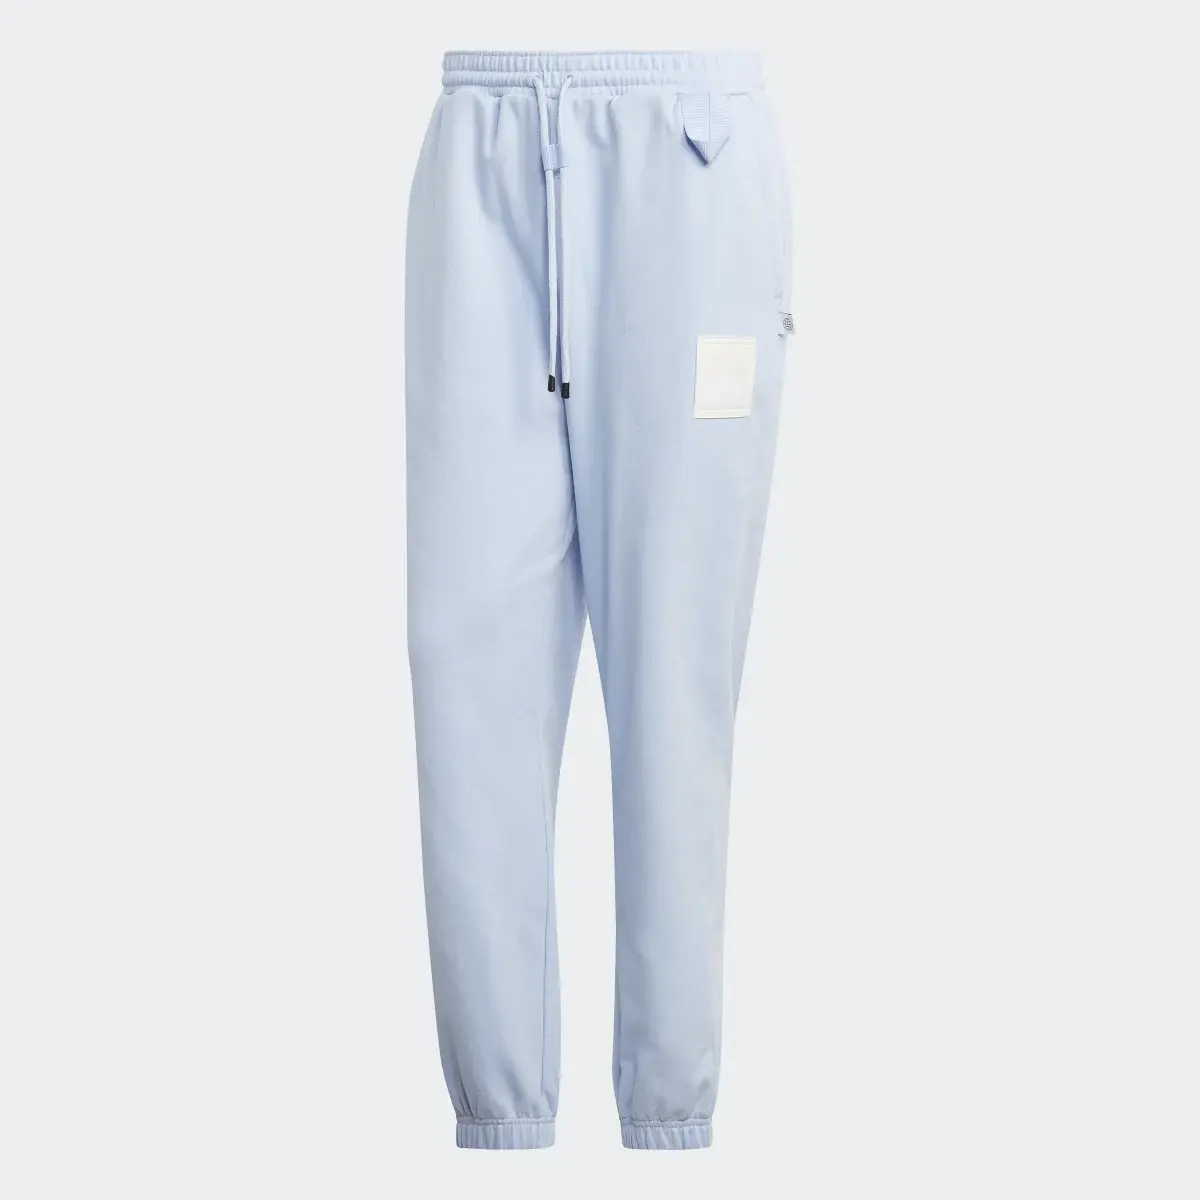 Adidas Lounge Heavy French Terry Pants. 3